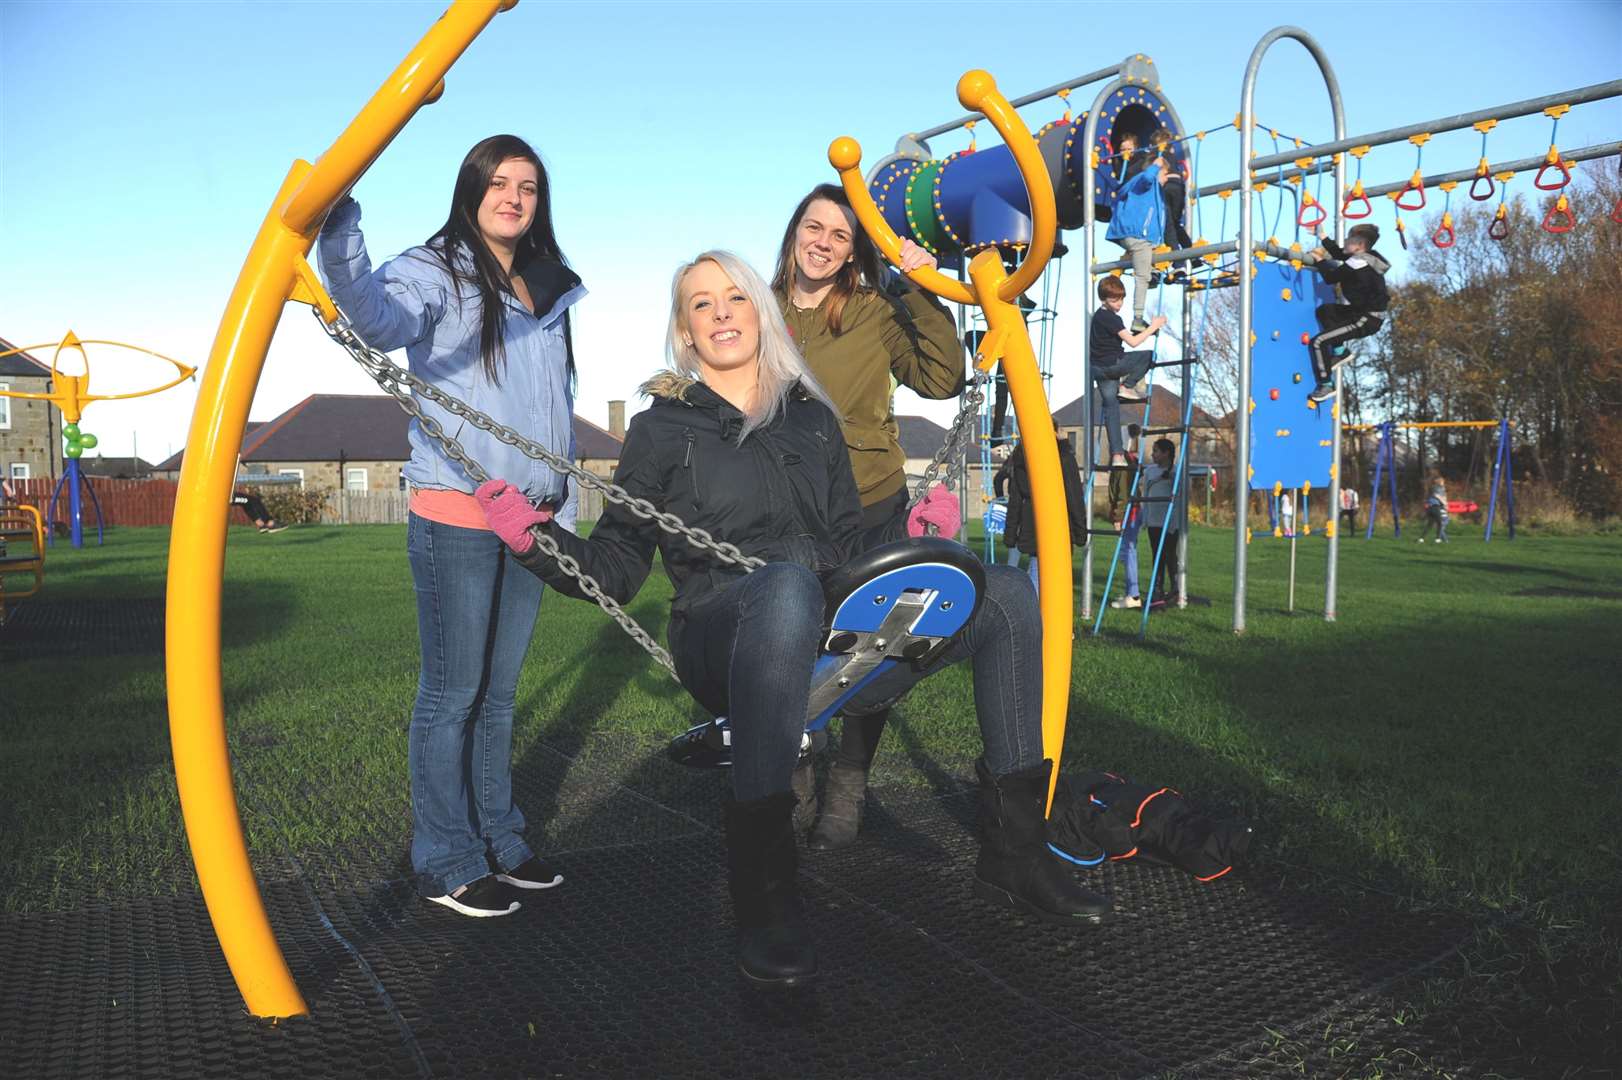 The opening of Well Road Playpark in Buckie in November 2018. Left to right: Michelle Gauld, Rachel Cormack and Gail Imlach. Picture: Eric Cormack